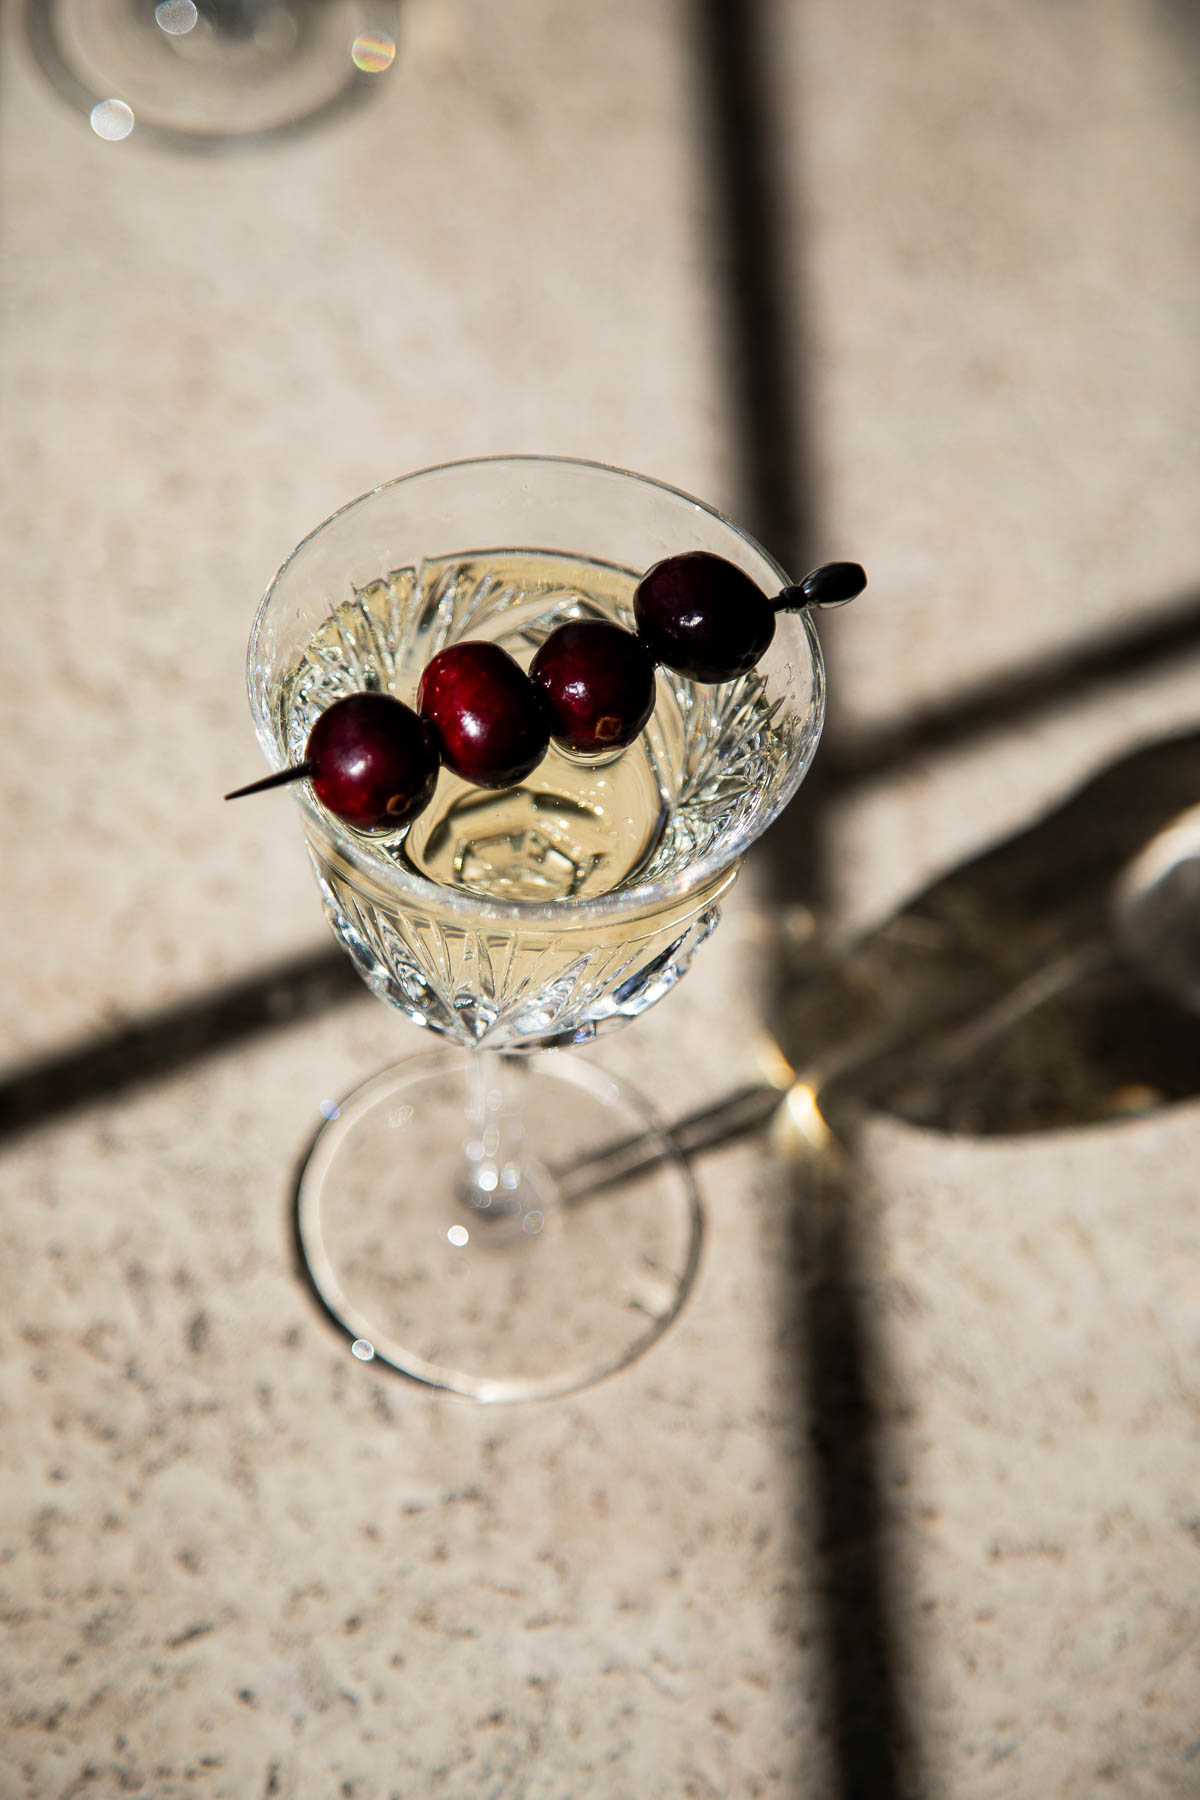 Skewered Cranberries in Glass of prosecco